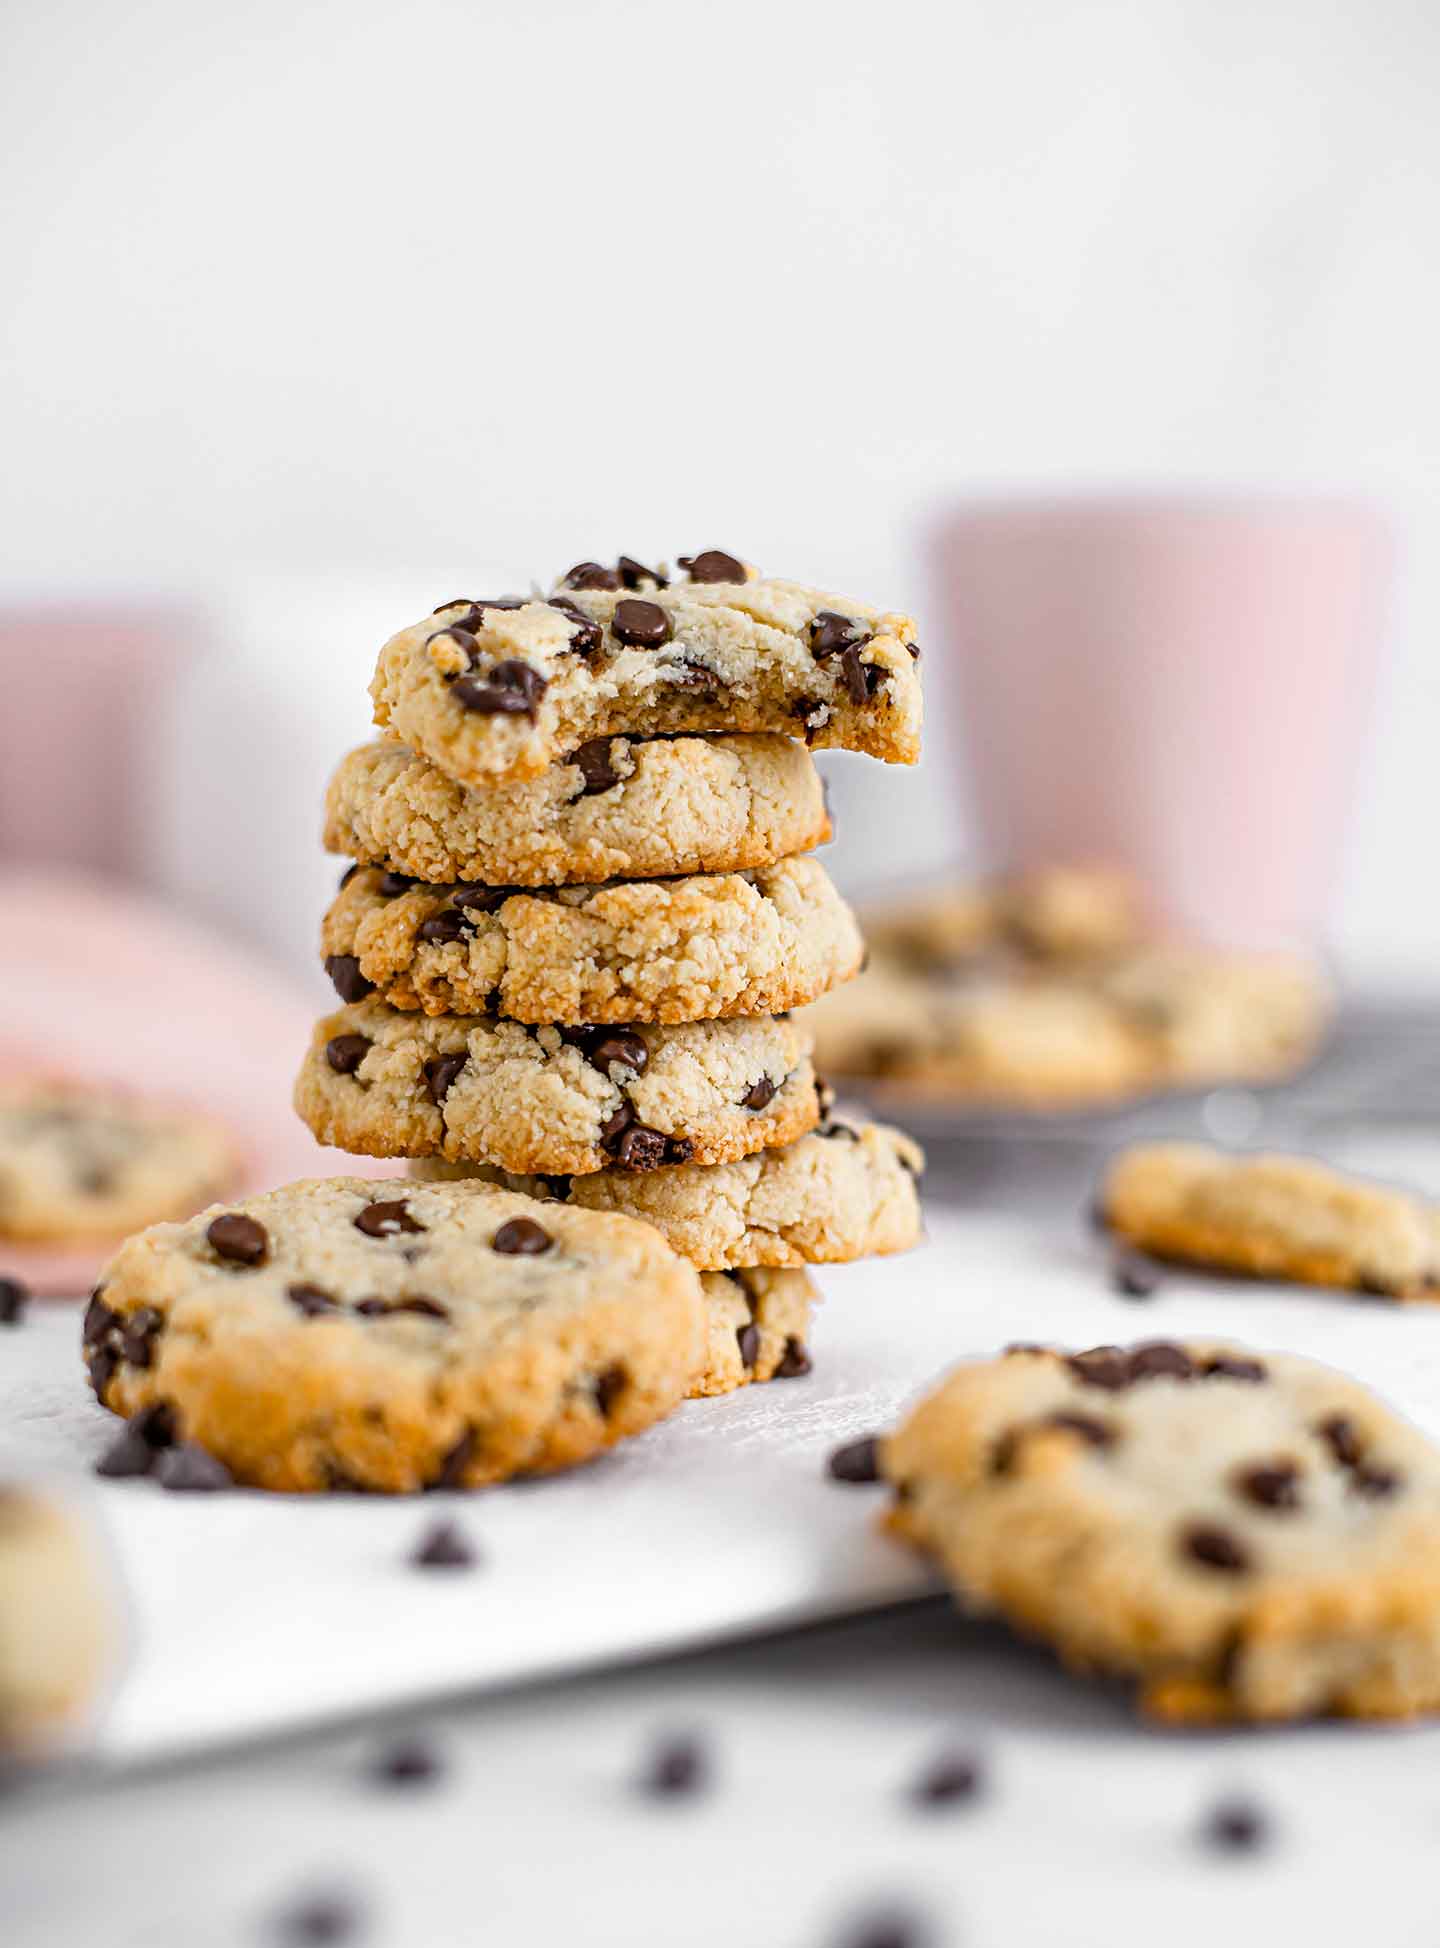 Close-up side view of a stack of cookies. The top cookie has a bite taken out of it. Mugs of coffee, a creamer, and more cookies are in the background.